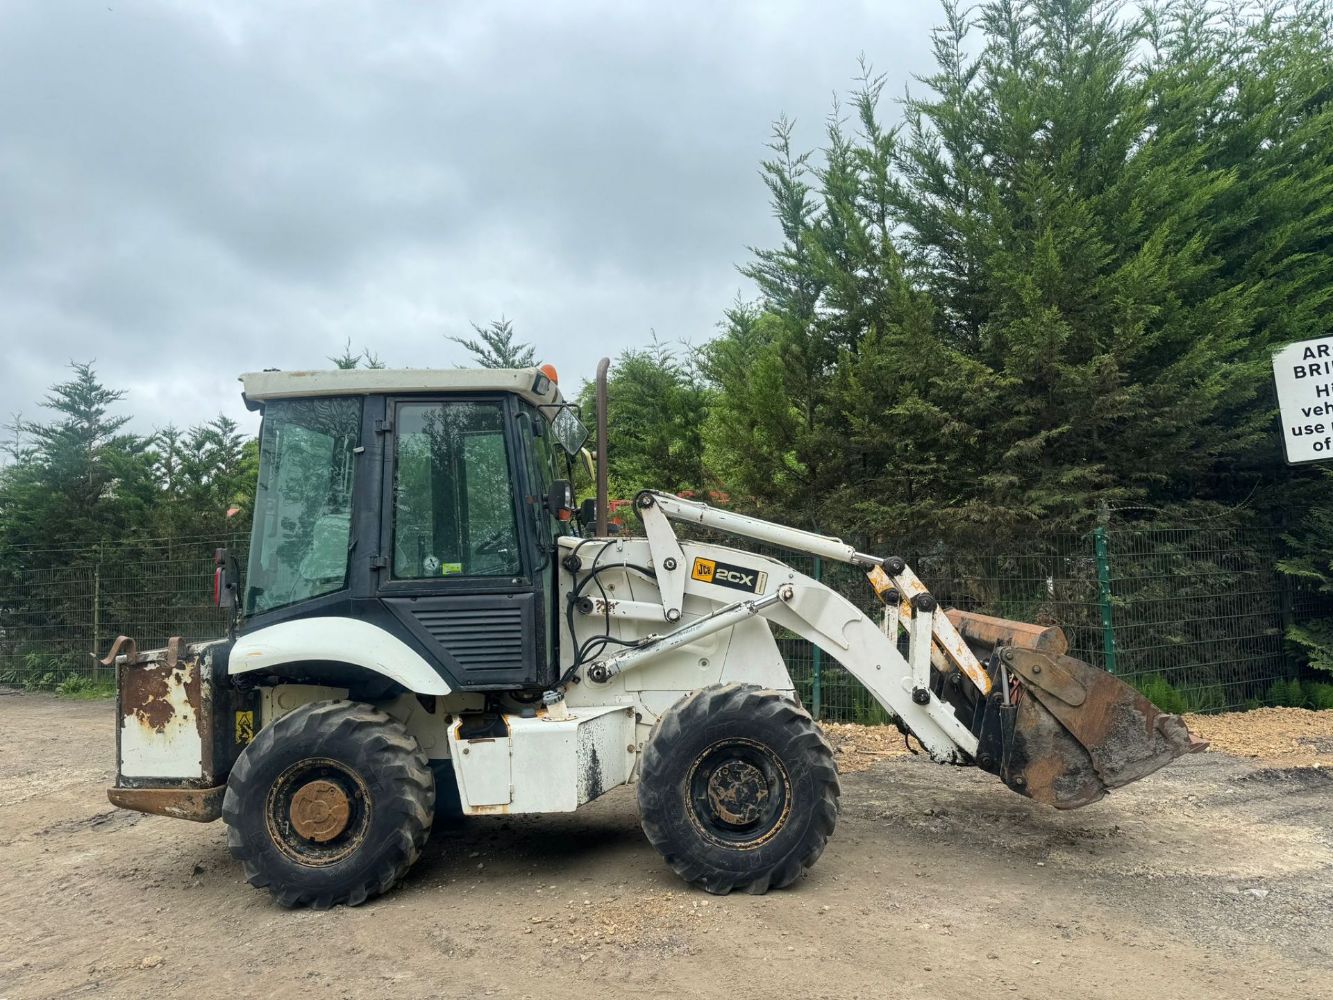 MONDAY 11AM! JCB 2CX, 2019 NISSAN NAVARA 190 4WD, MANITOU, TEREX, BOMAG, PLYMOUTH PROWLER, EV VEHICLES, TRACTORS, MOWERS, VANS & MUCH MORE!